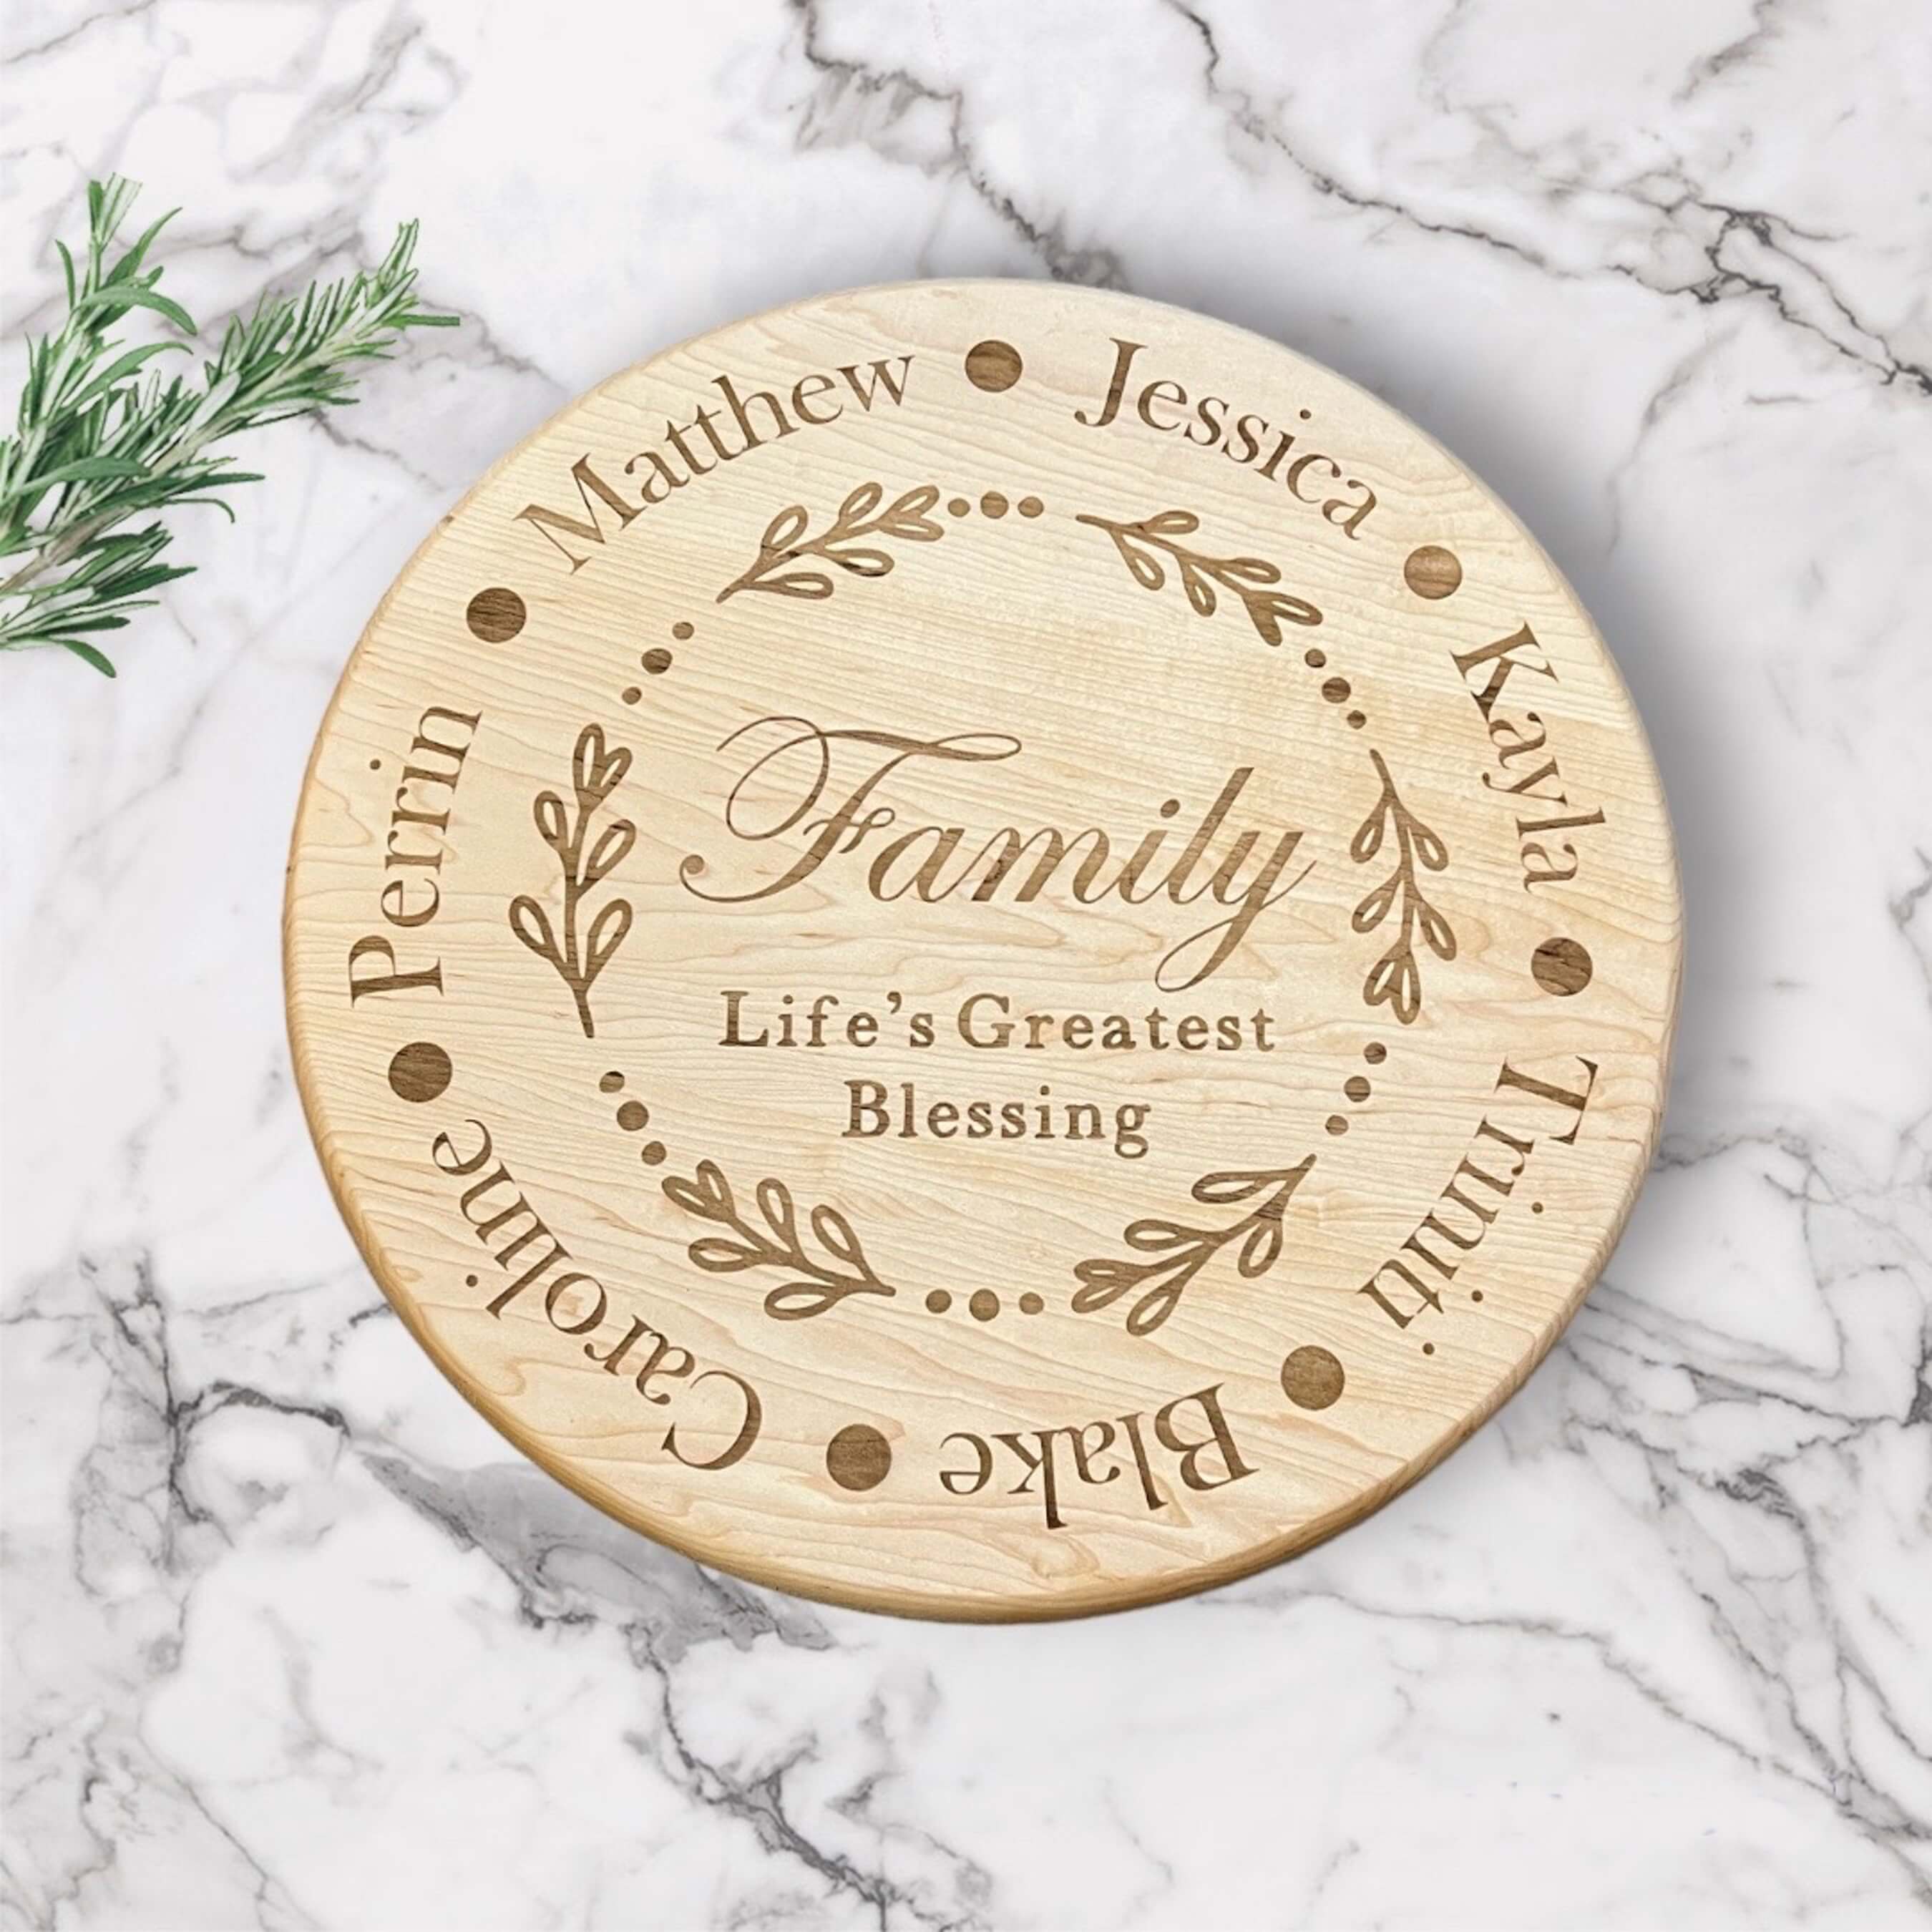 Personalized Lazy Susan, Wedding Gift, Personalized Wedding Gift, Anniversary Gift, Best Friend Gift, Personalised Lazy Susan